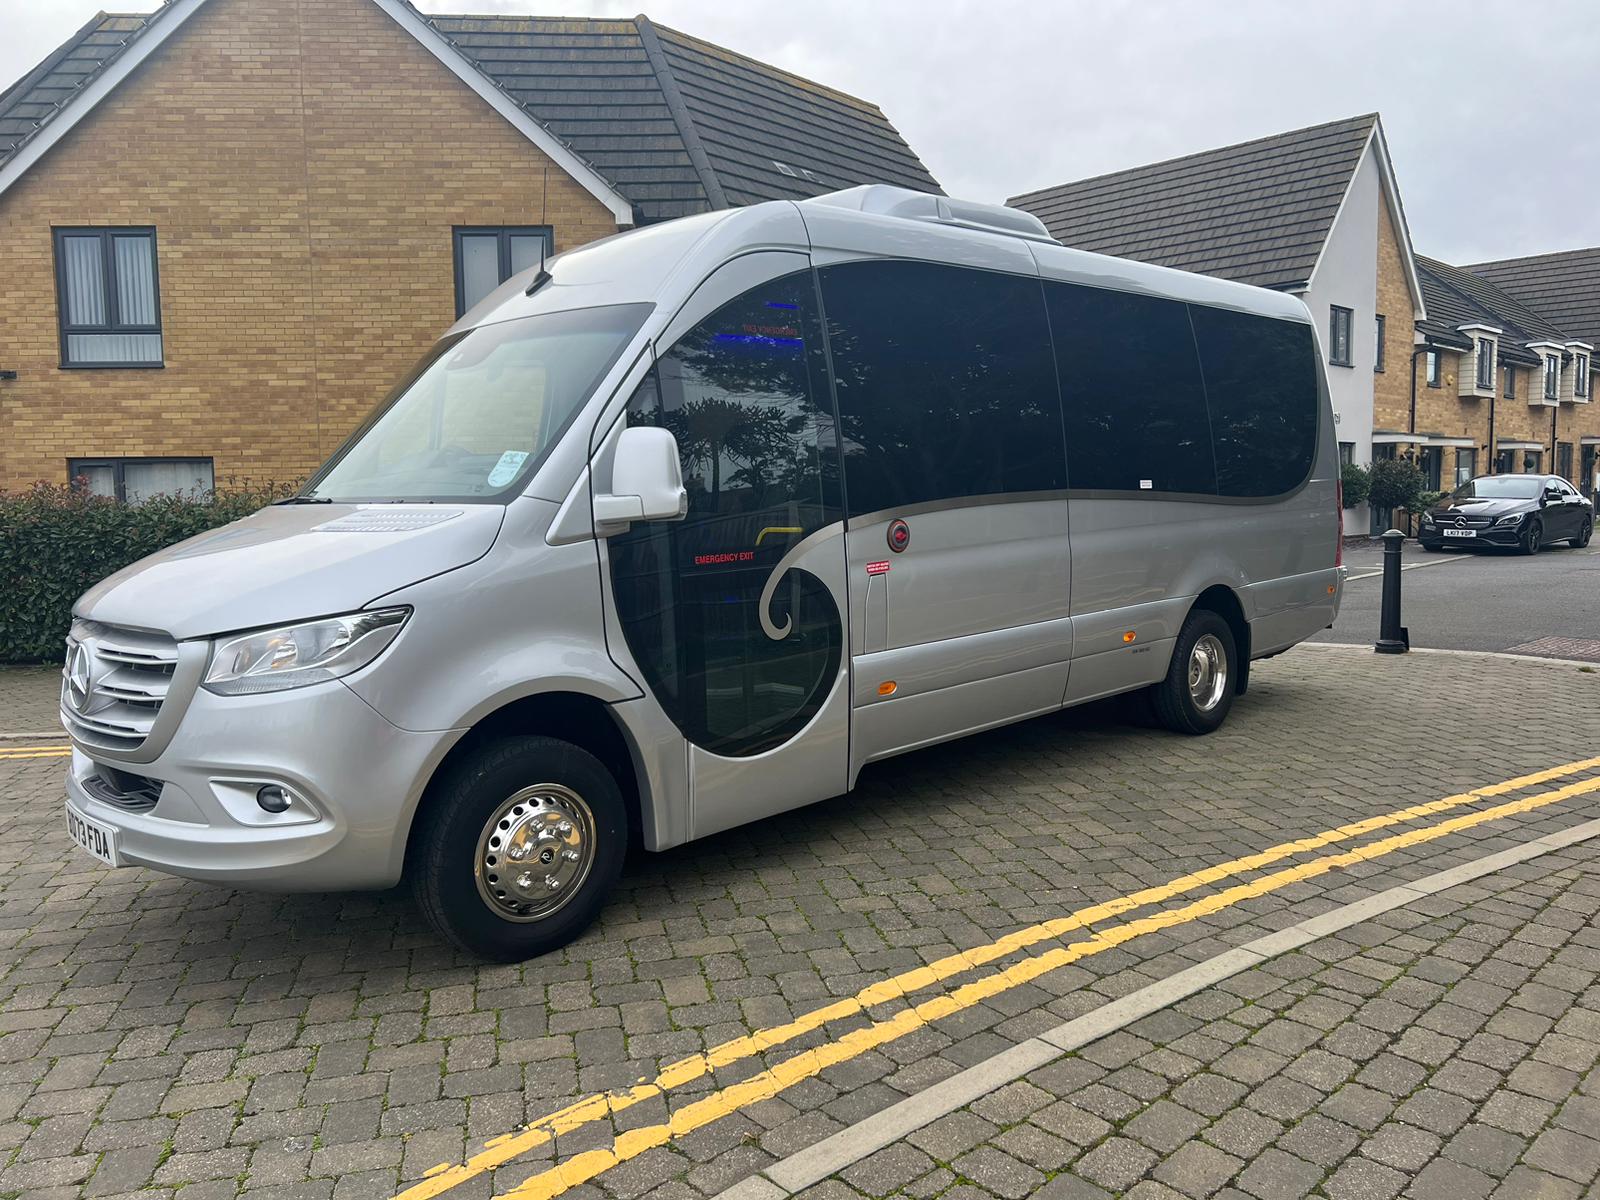 Why Hire a 16 Seater Minibus for Your Next Family Trip?